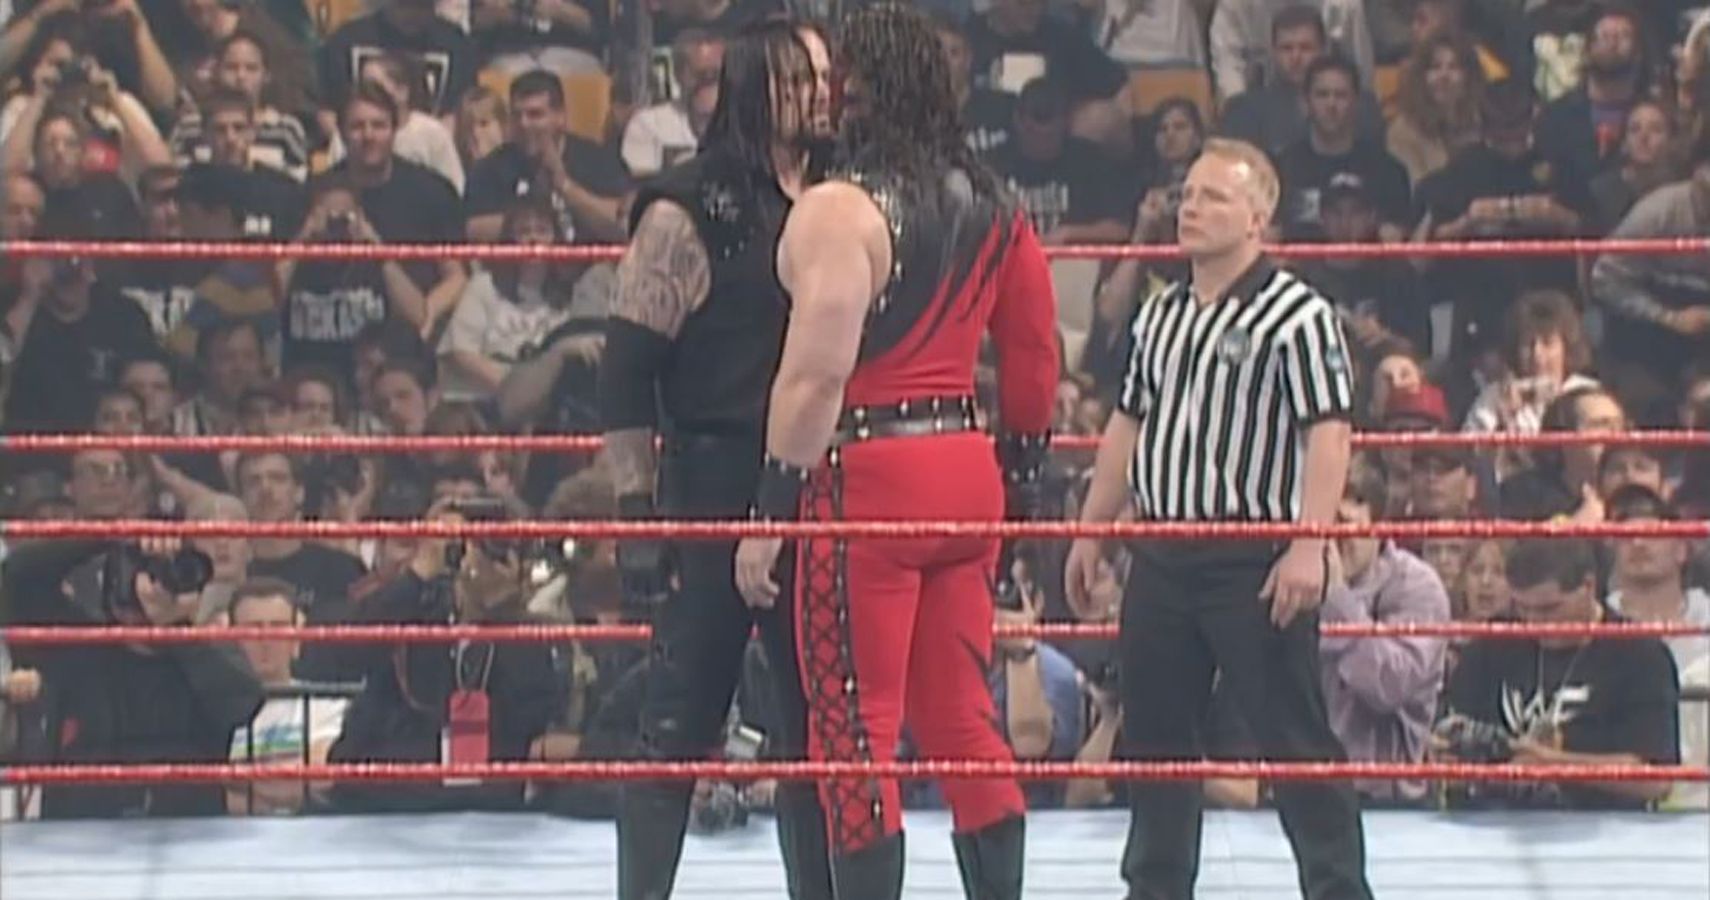 10 Best Matches in The Undertaker's Career